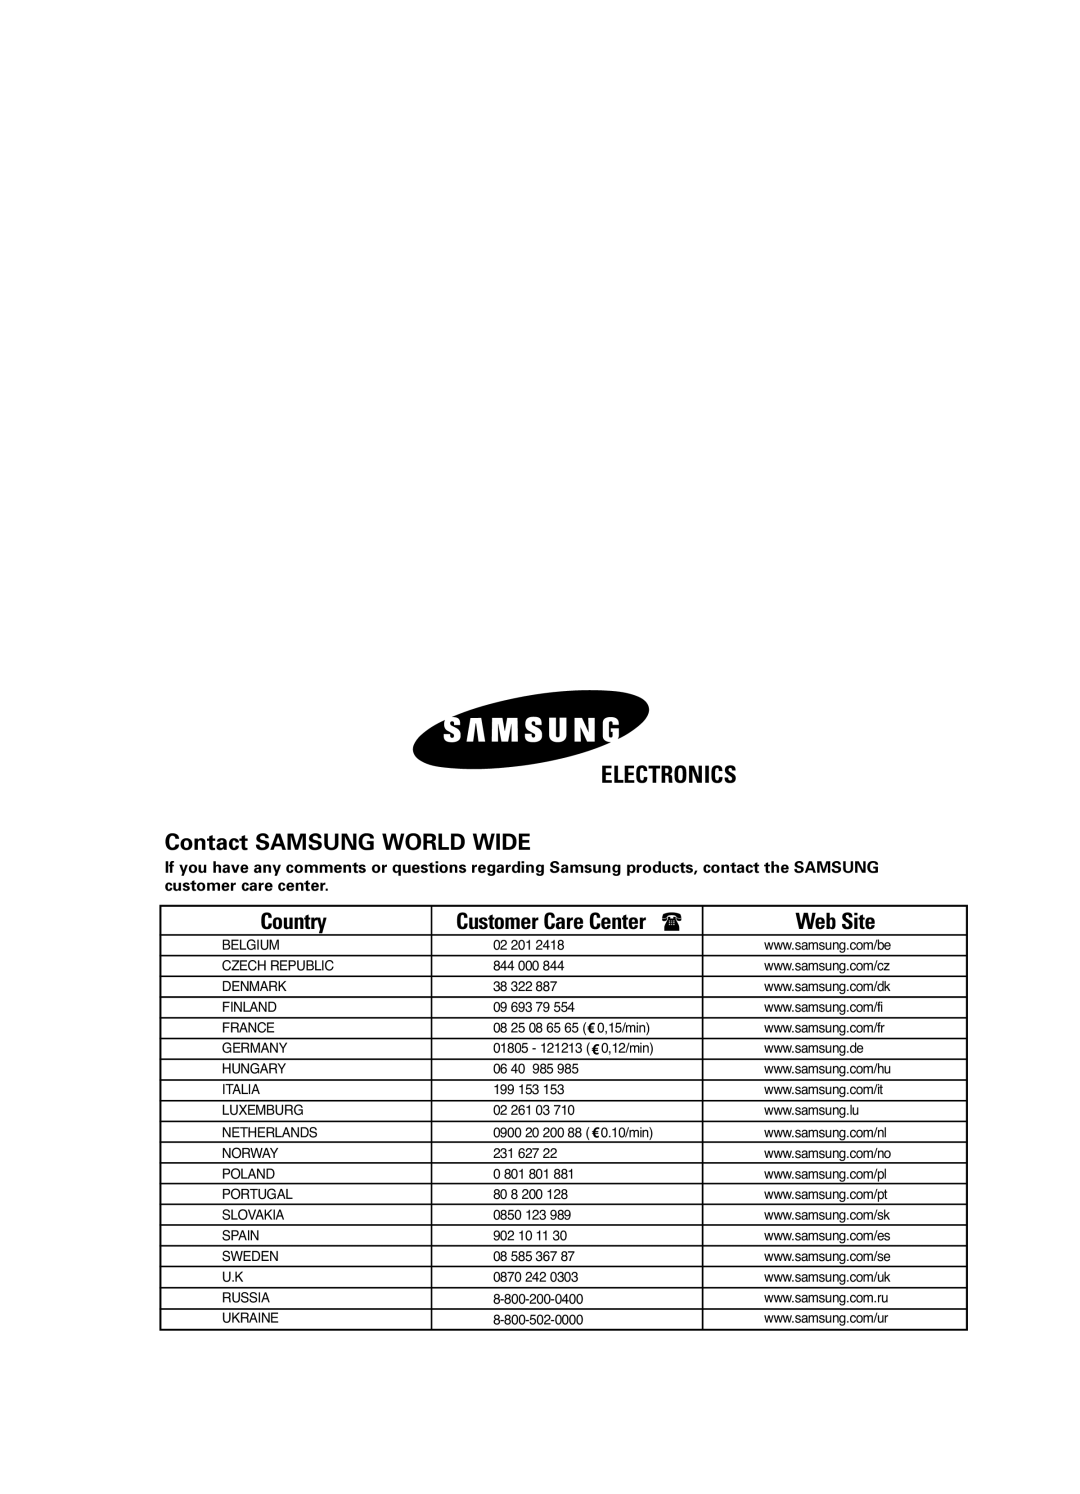 Samsung AVMDH(C) user manual Electronics, Contact SAMSUNG WORLD WIDE, Country, Customer Care Center, Web Site 